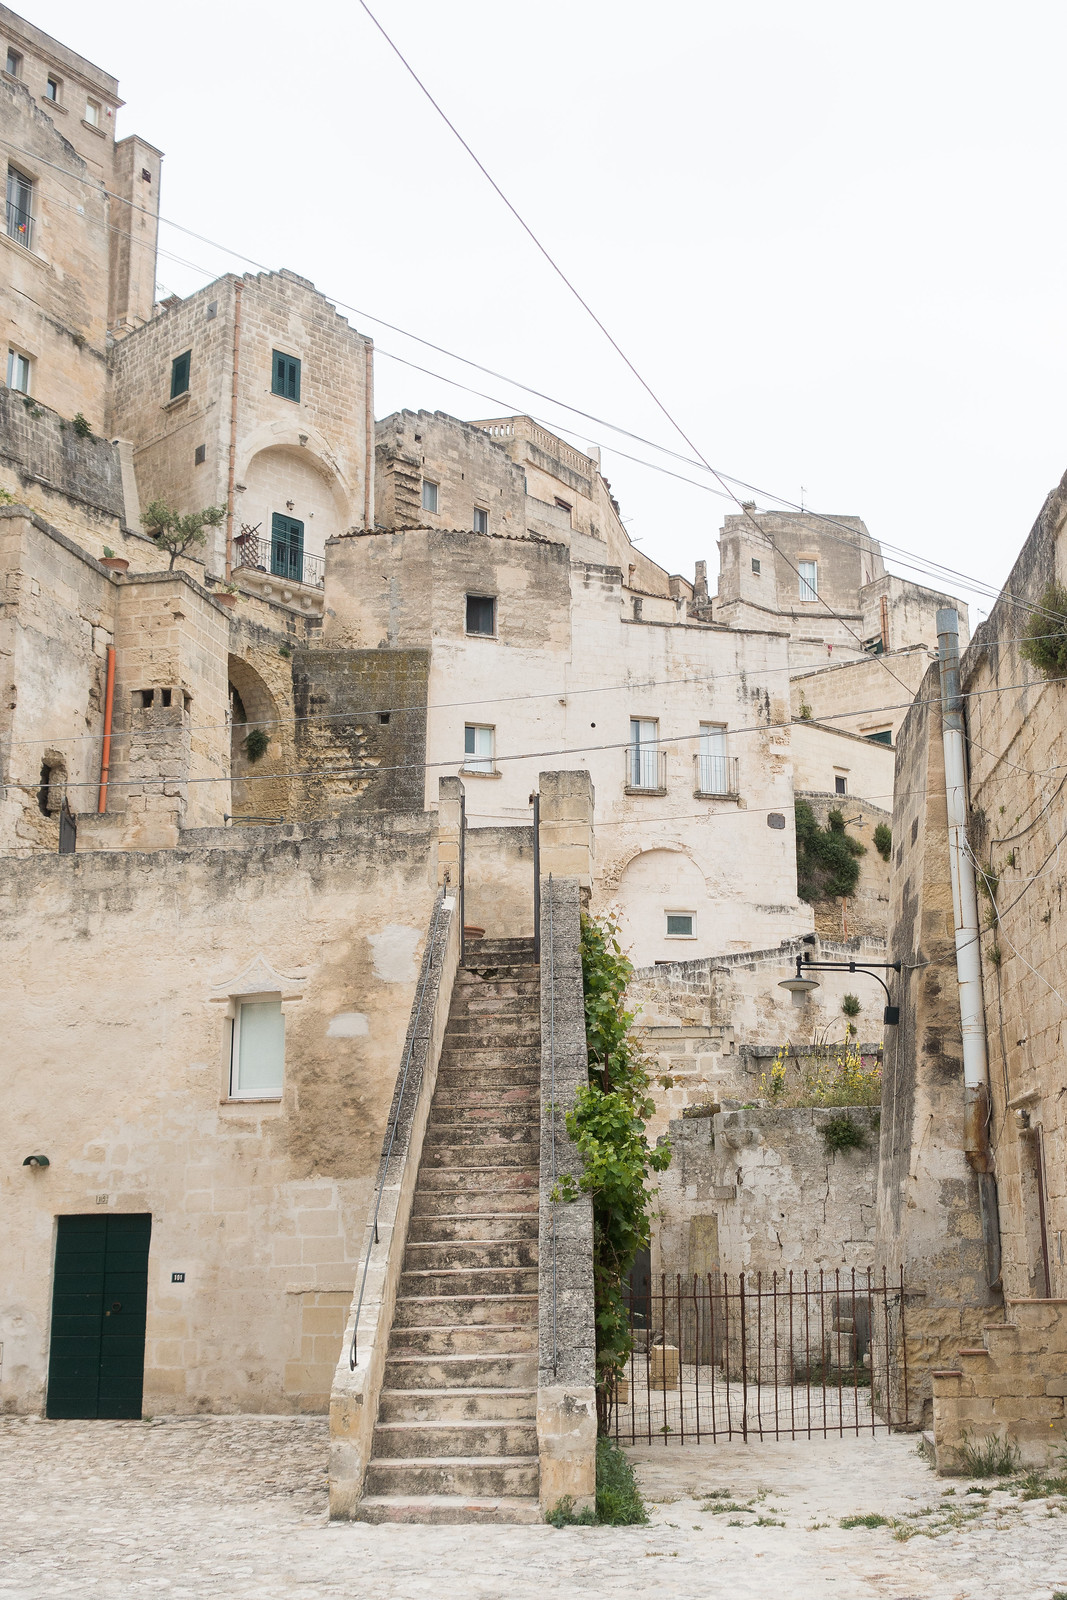 Visiting Matera, Italy: Where To Stay, Things To Do, and What To Eat